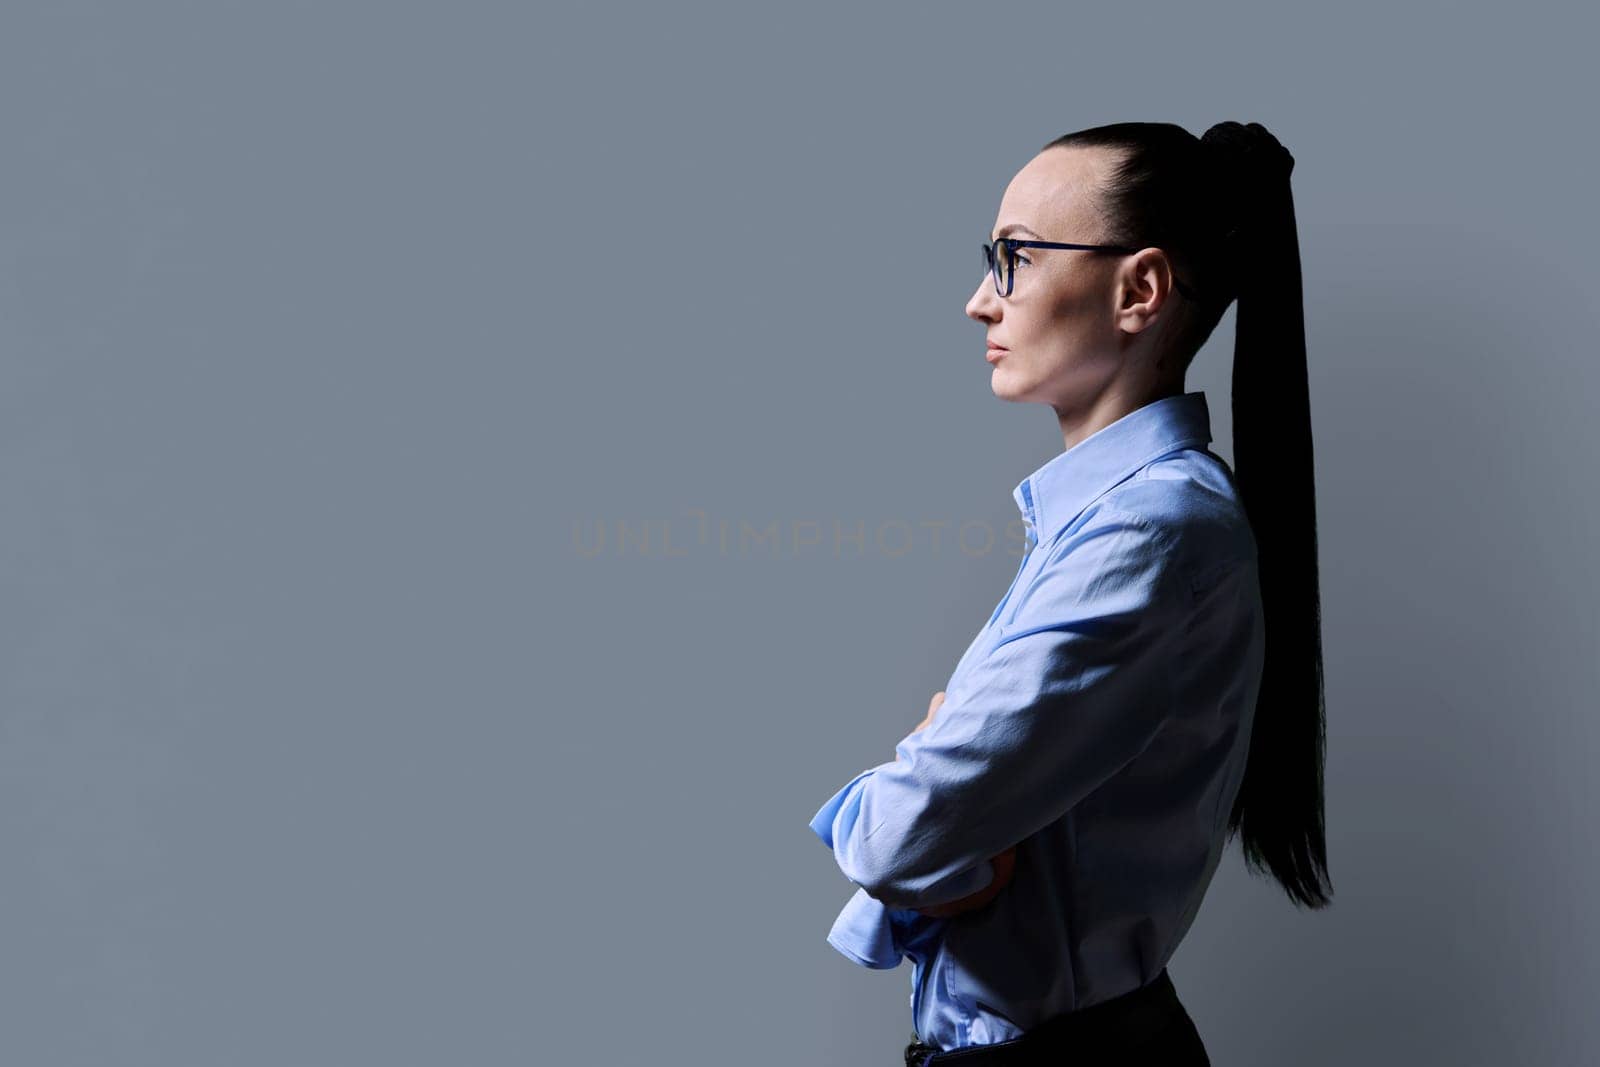 Profile view of middle aged serious woman looking forward, gray studio background, copy space for advertising image text. 30s business confident successful female. Marketing sales services, people